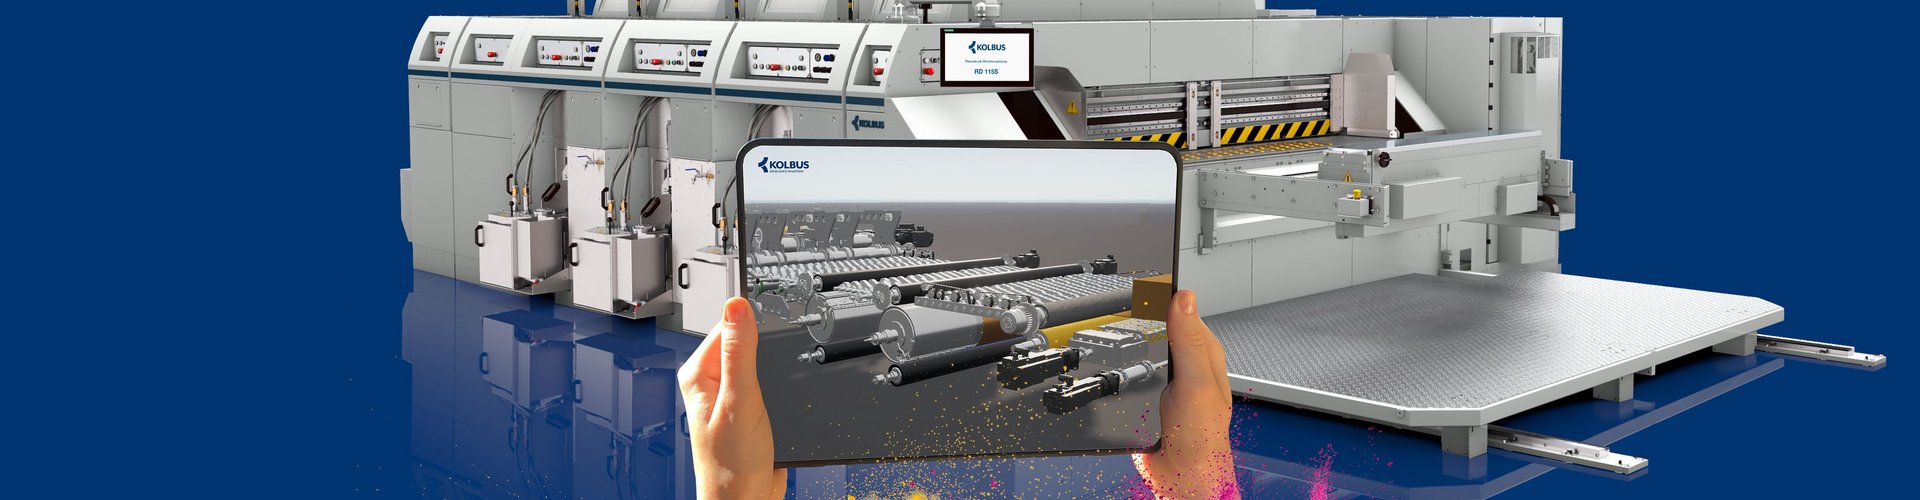 Discover new possibilities of RD 115S flexo print